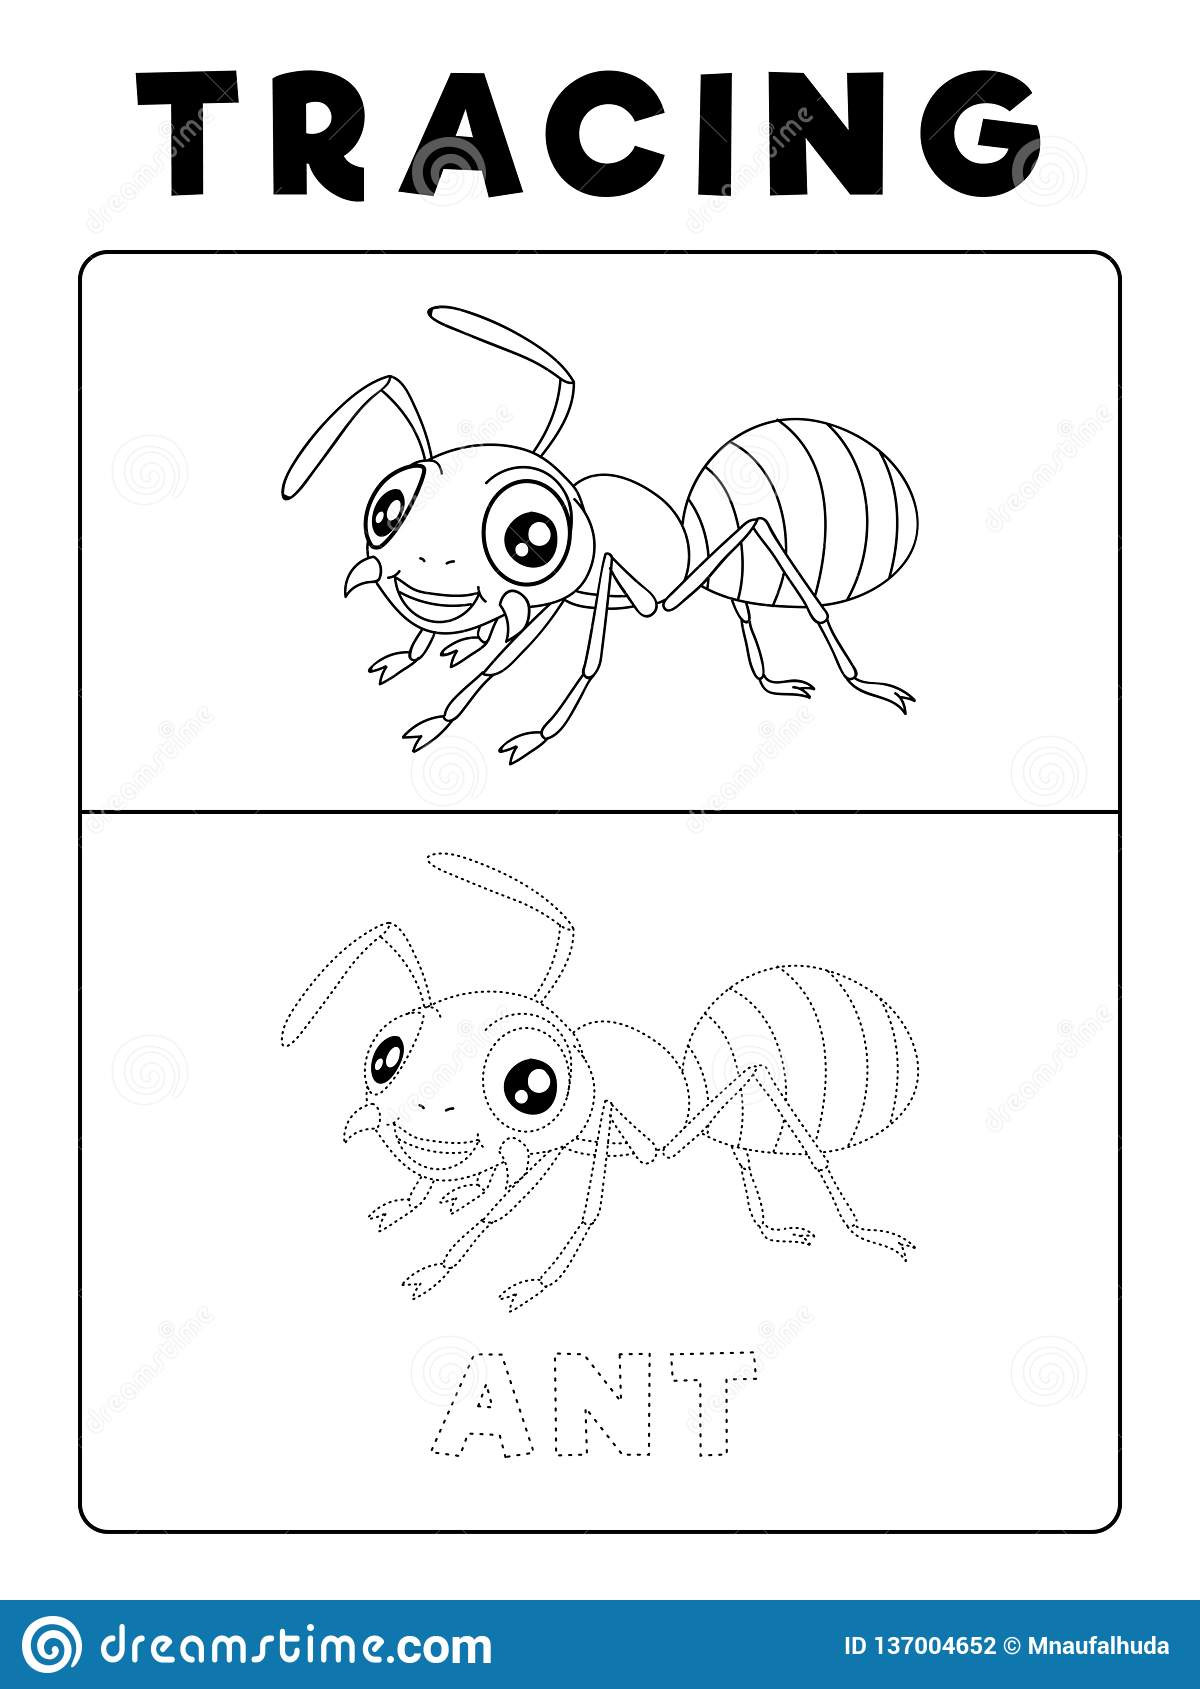 Insect Worksheets for Preschoolers Funny Ant Insect Animal Tracing Book with Example Preschool